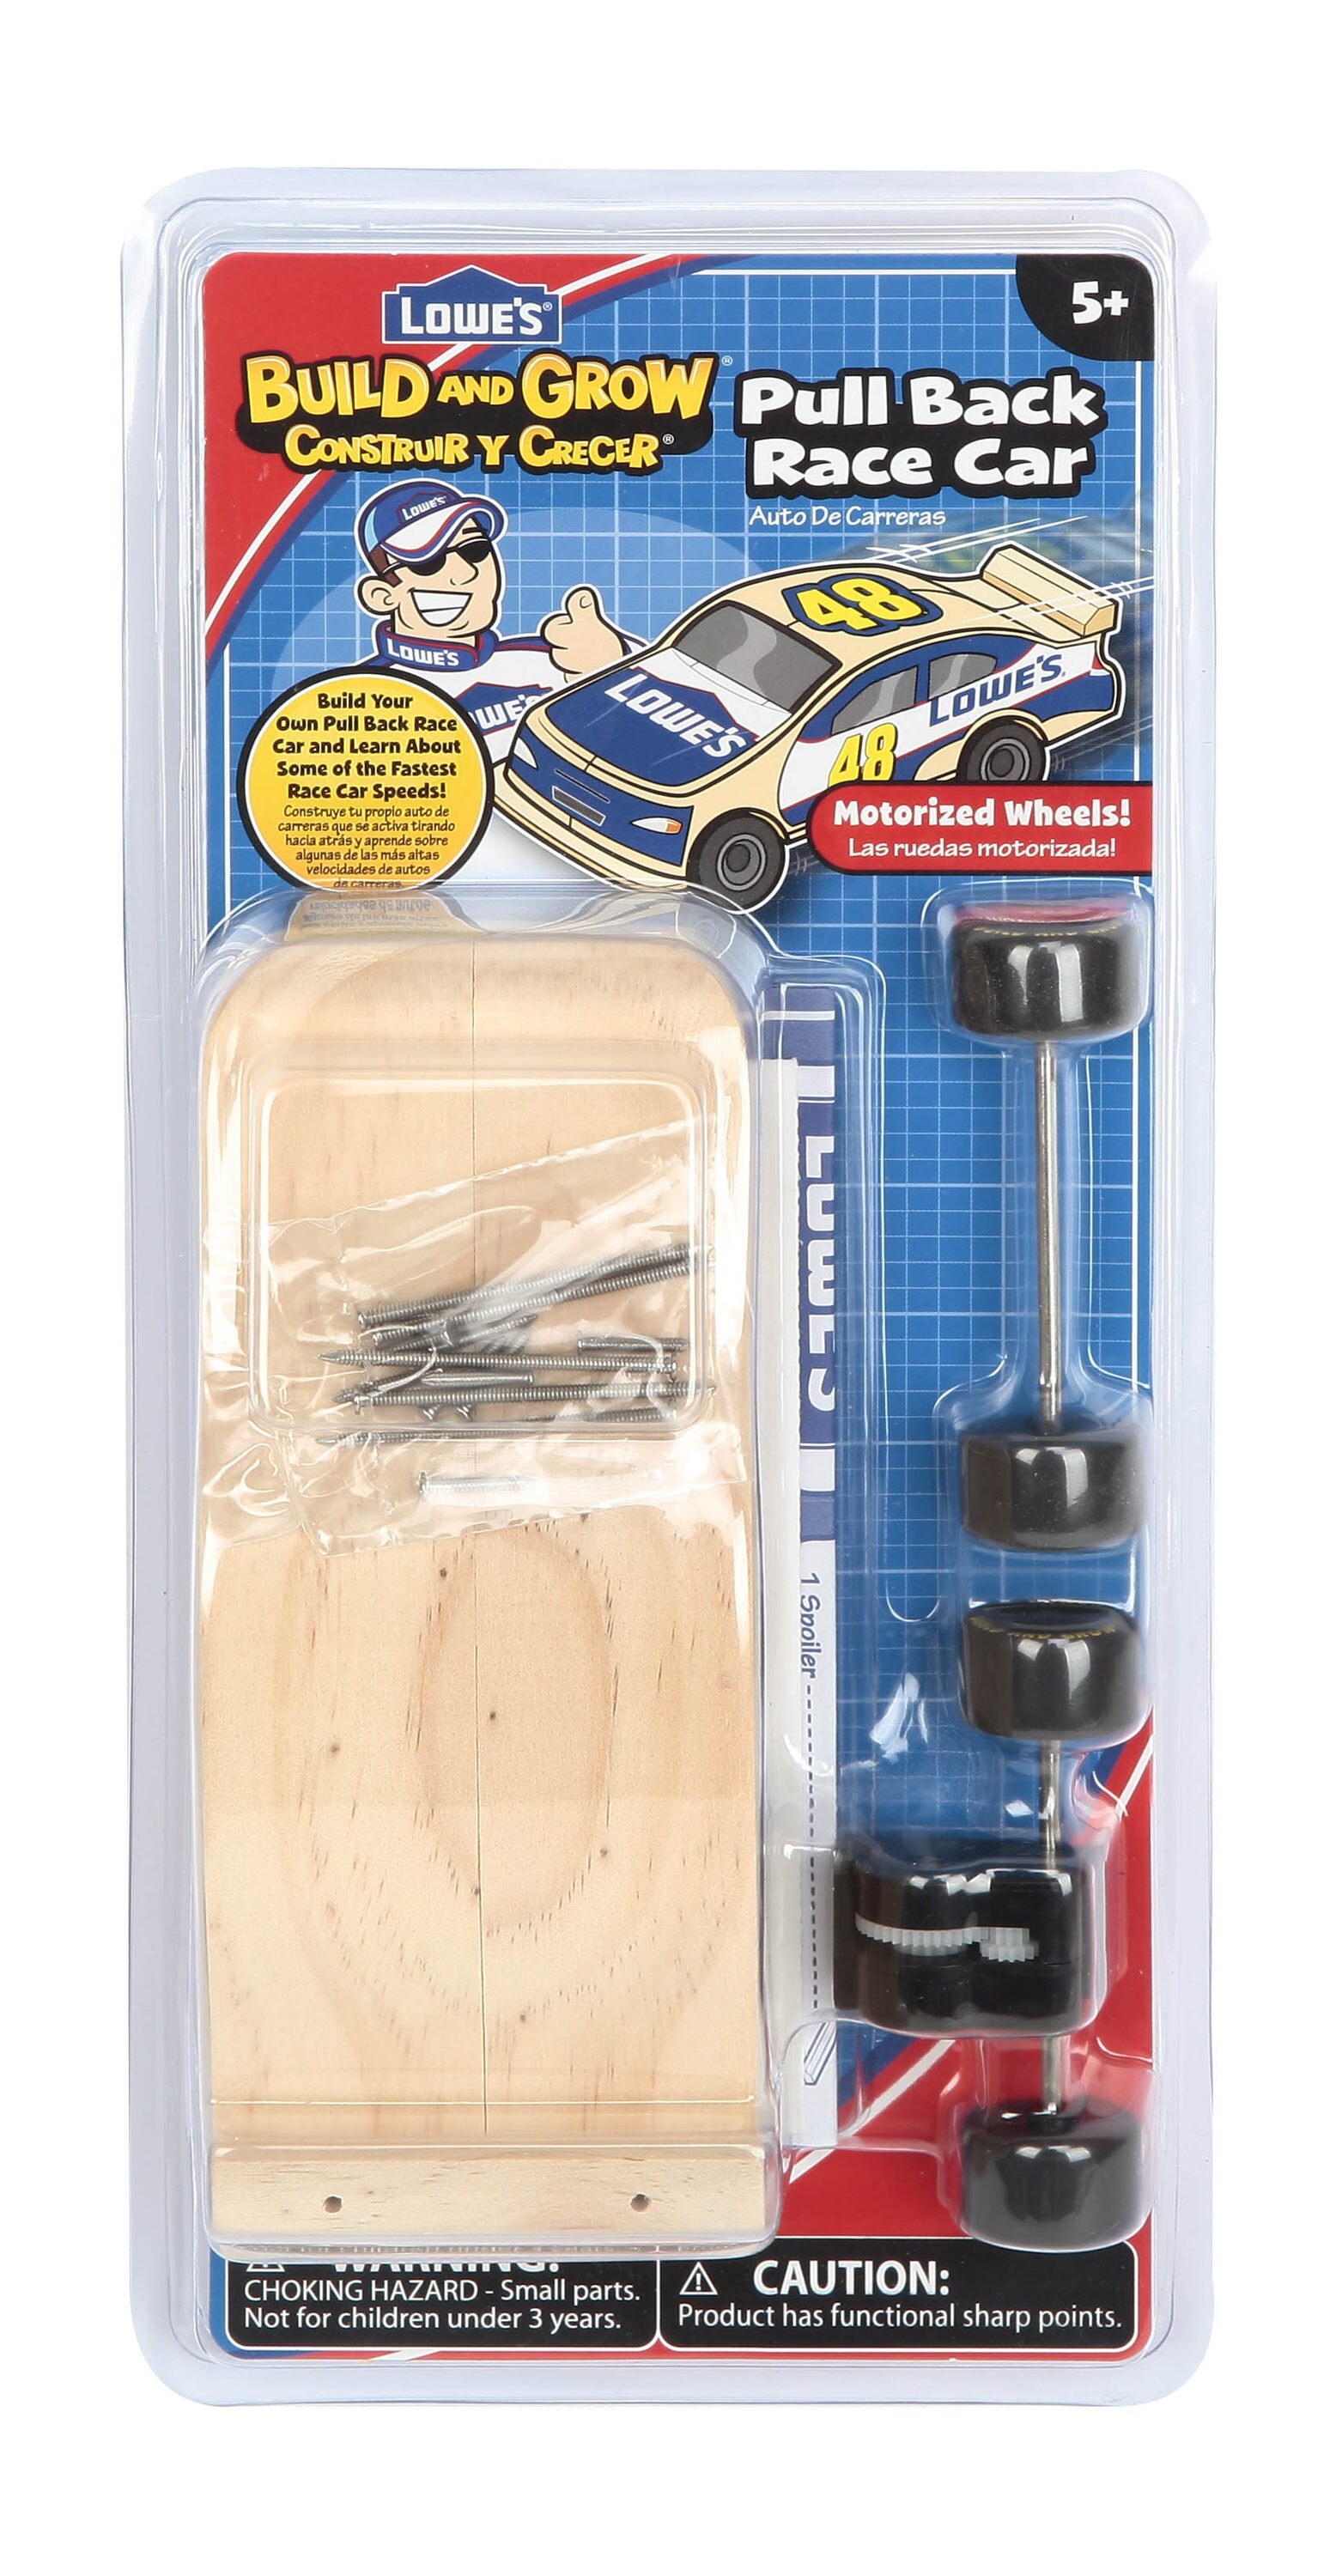 Pull Back Race Car Lowe’s Wooden Build and Grow Kit New Sealed 